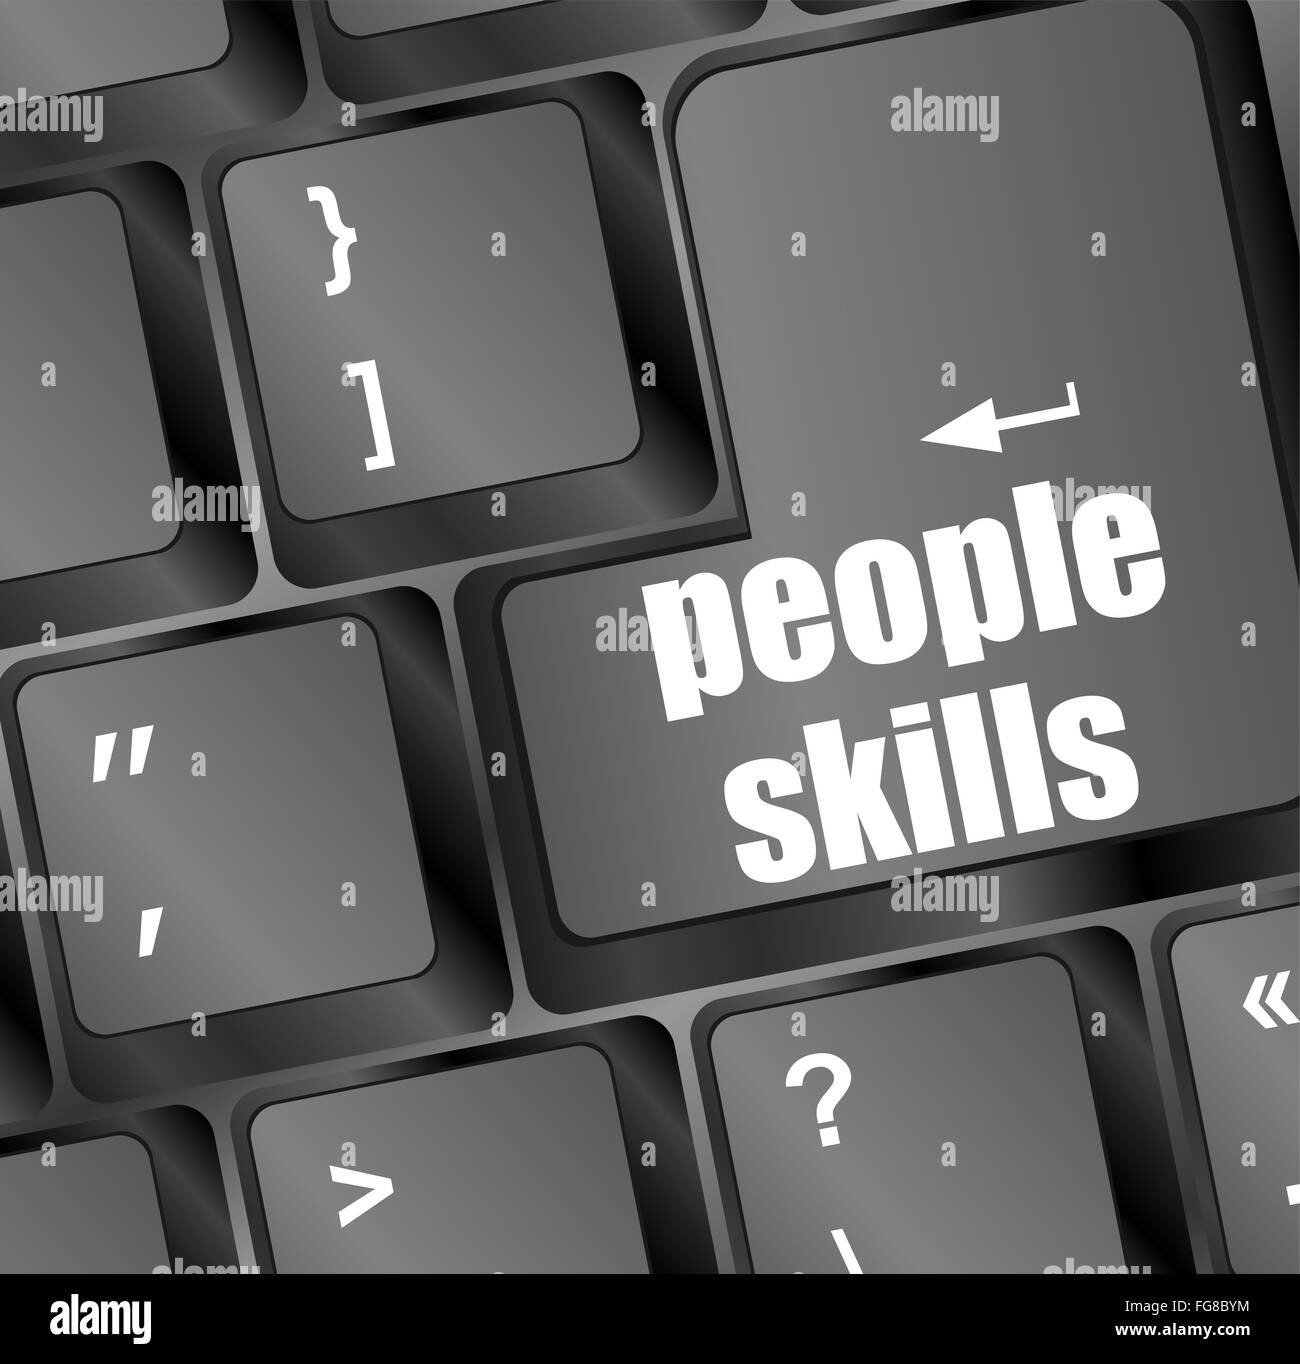 people skills words, message on enter key of keyboard Stock Photo